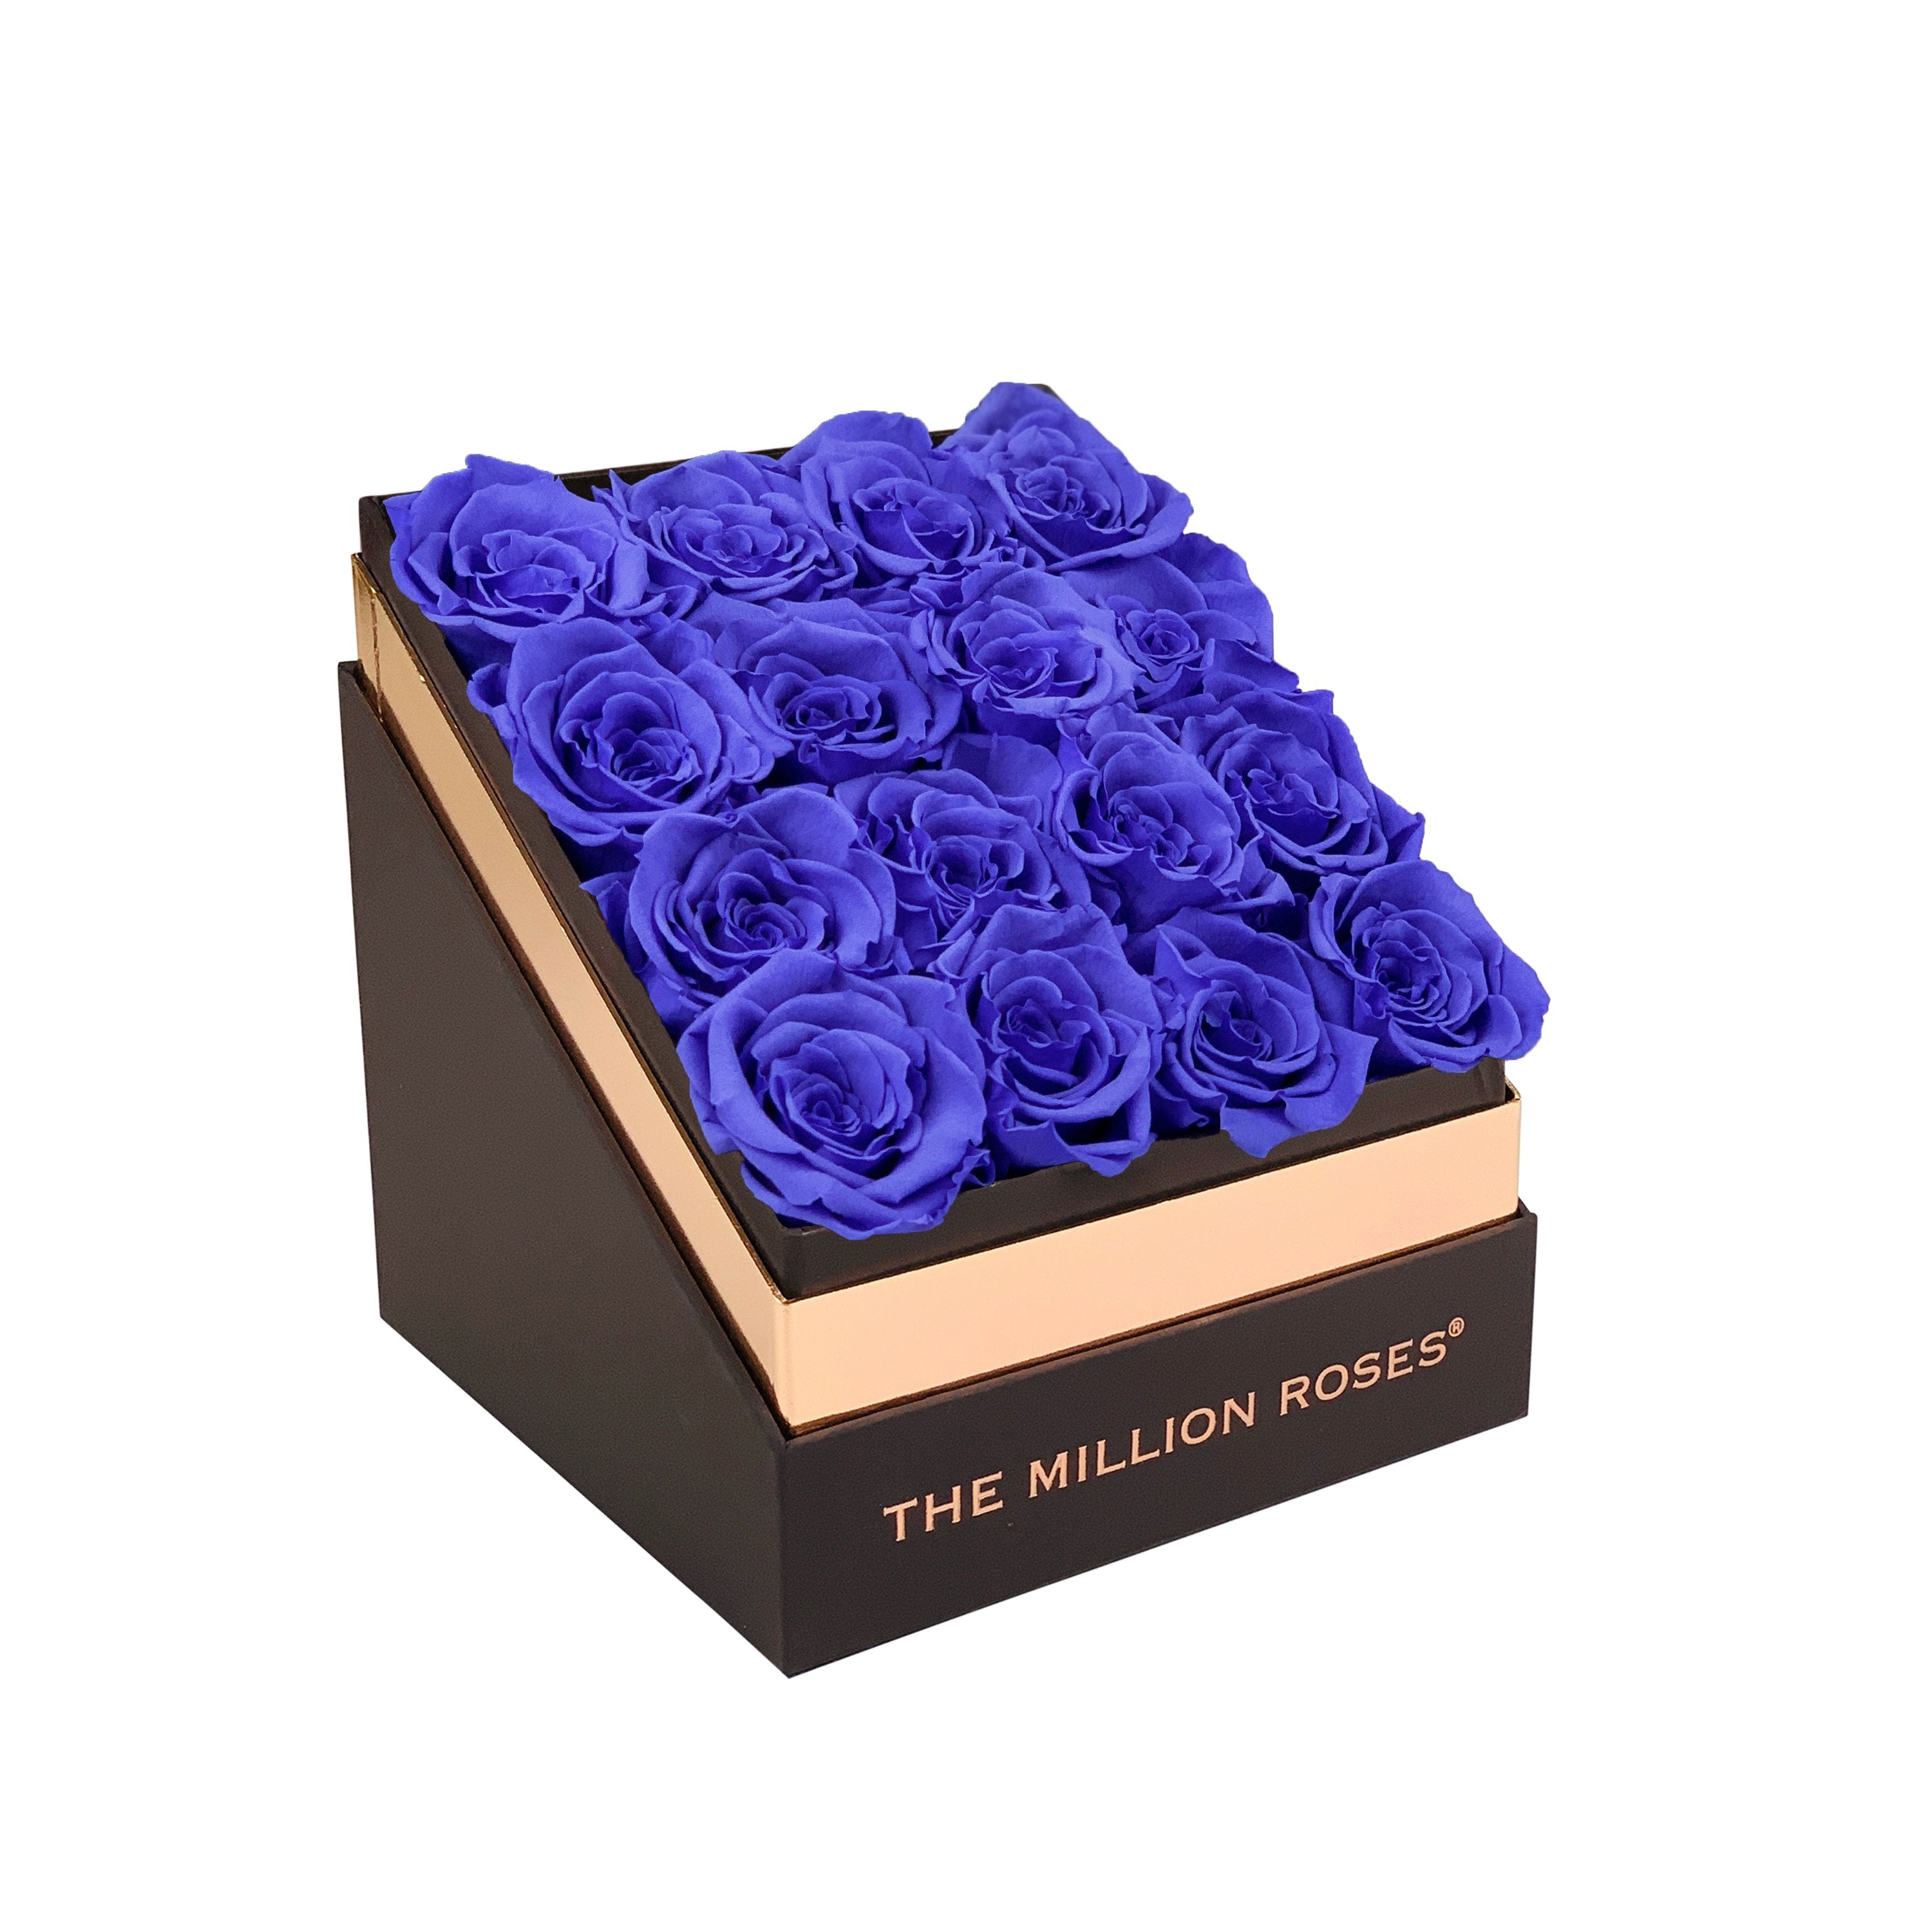 The Square - Coffee Box - Violet Roses